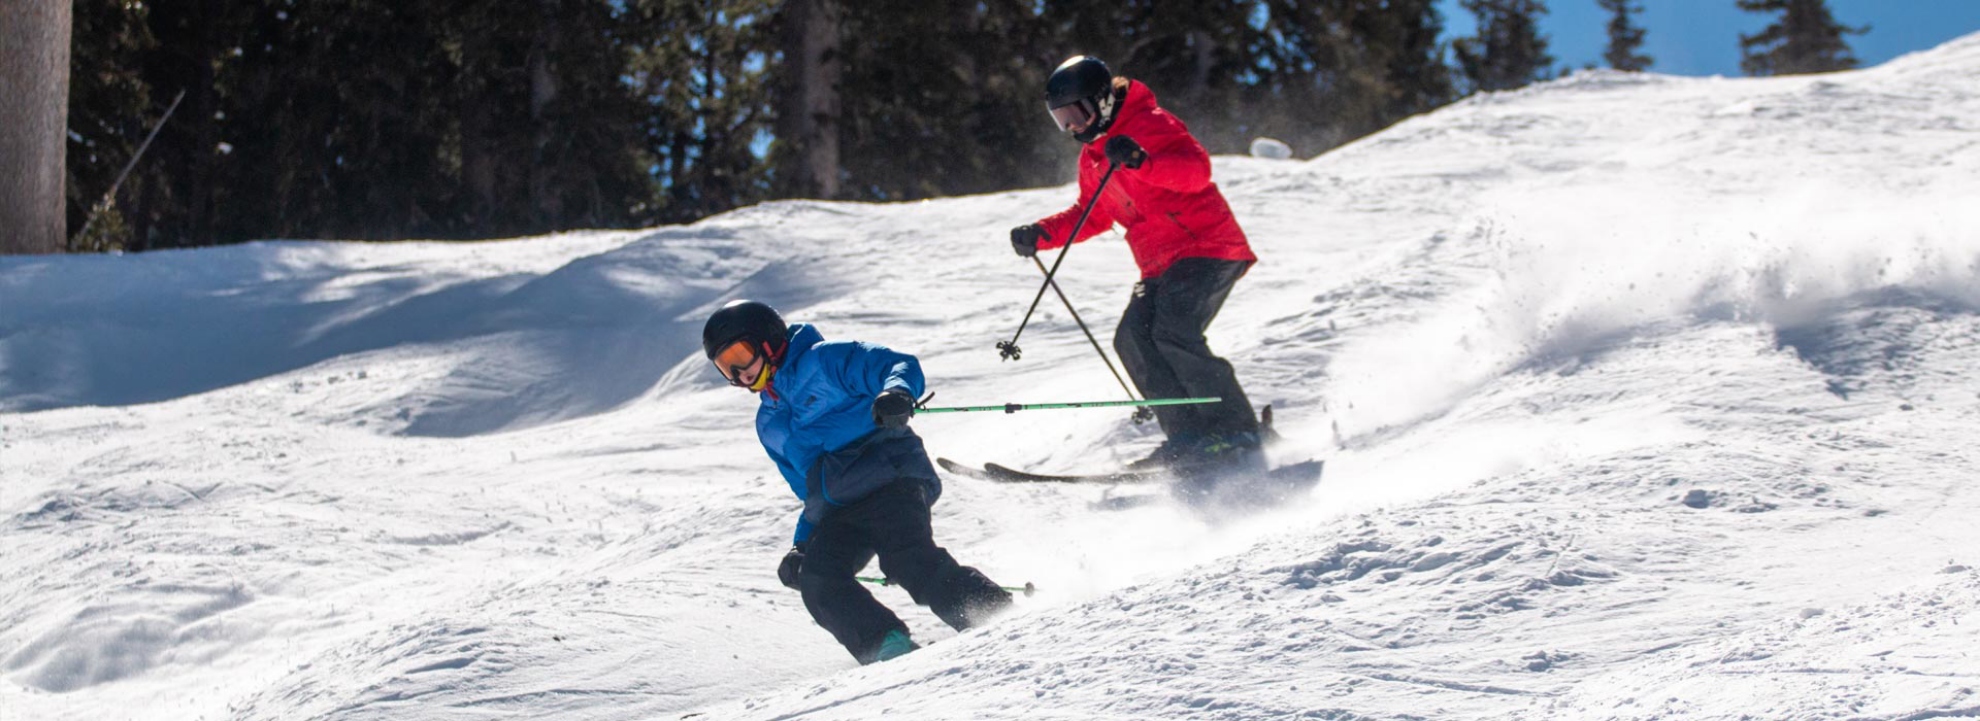 A Brighton Resort instructor teaching a young teen how to ski.	